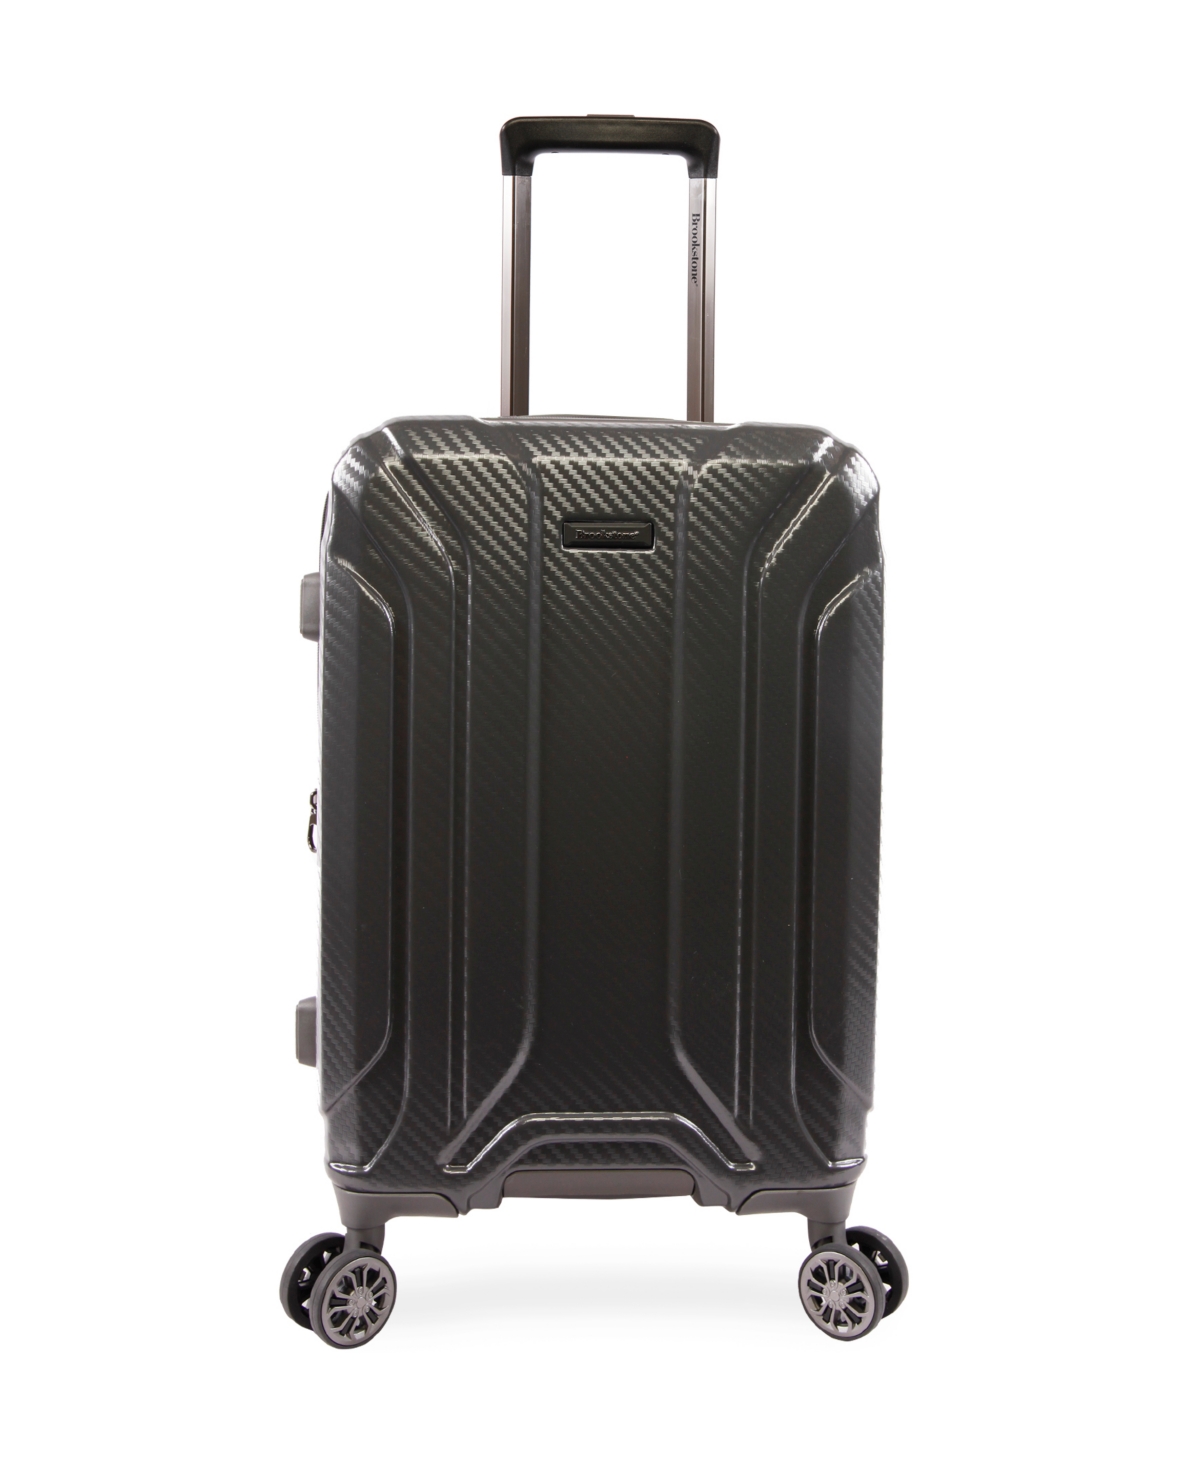 Keane 21" Hardside Carry-On Luggage with Charging Port - Charcoal